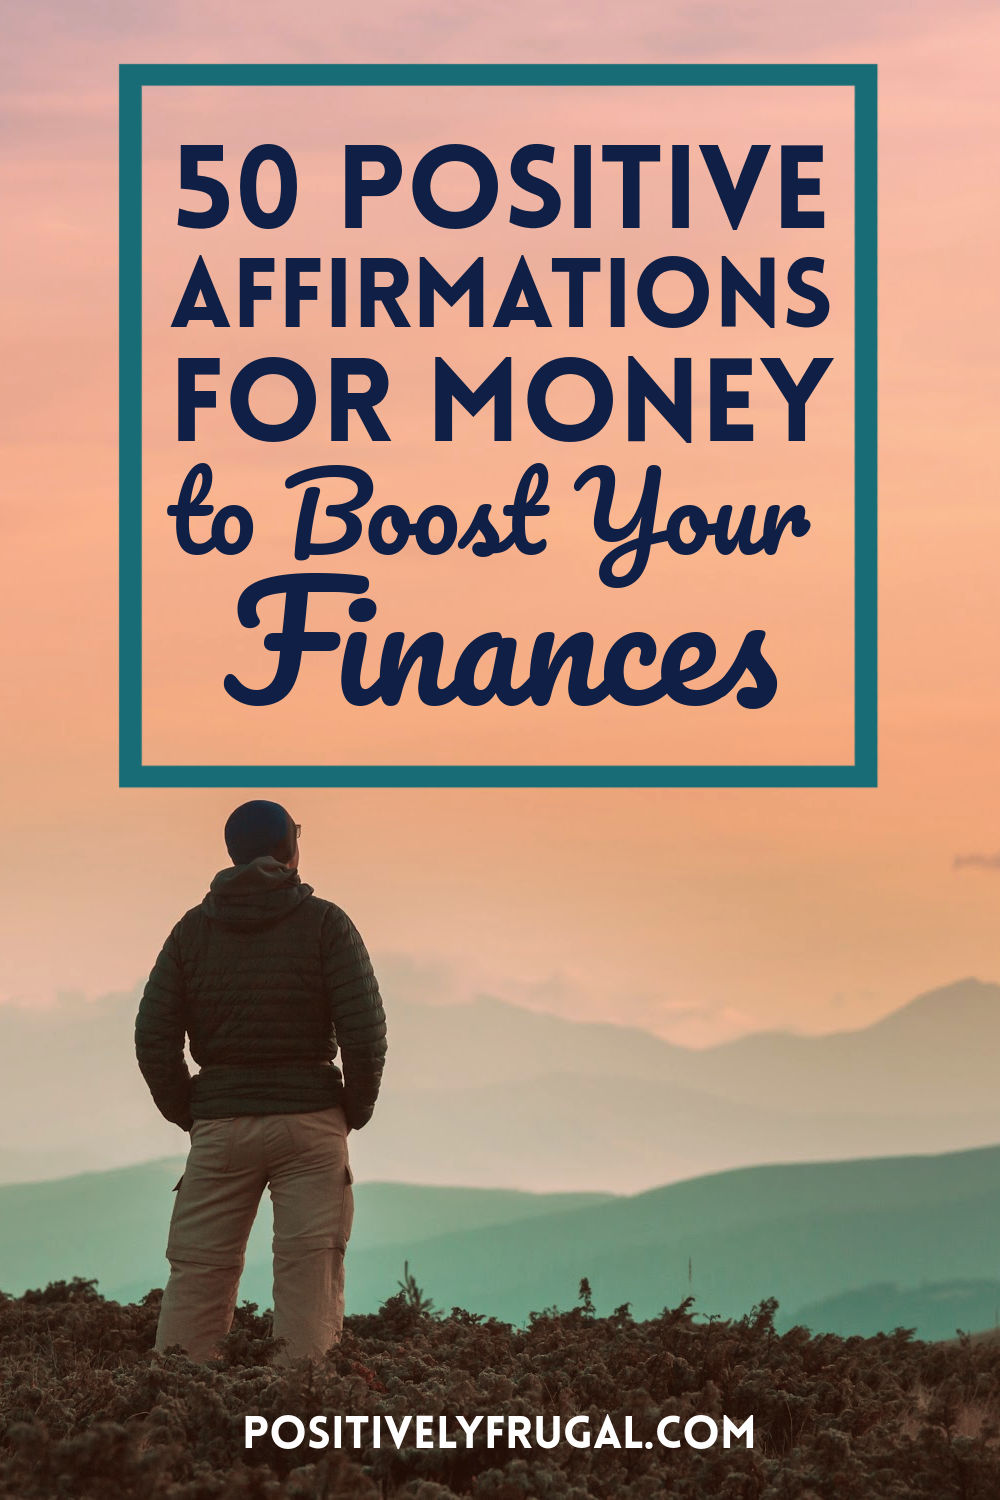 Affirmations for Money to Boost Your Finances by PositivelyFrugal.com